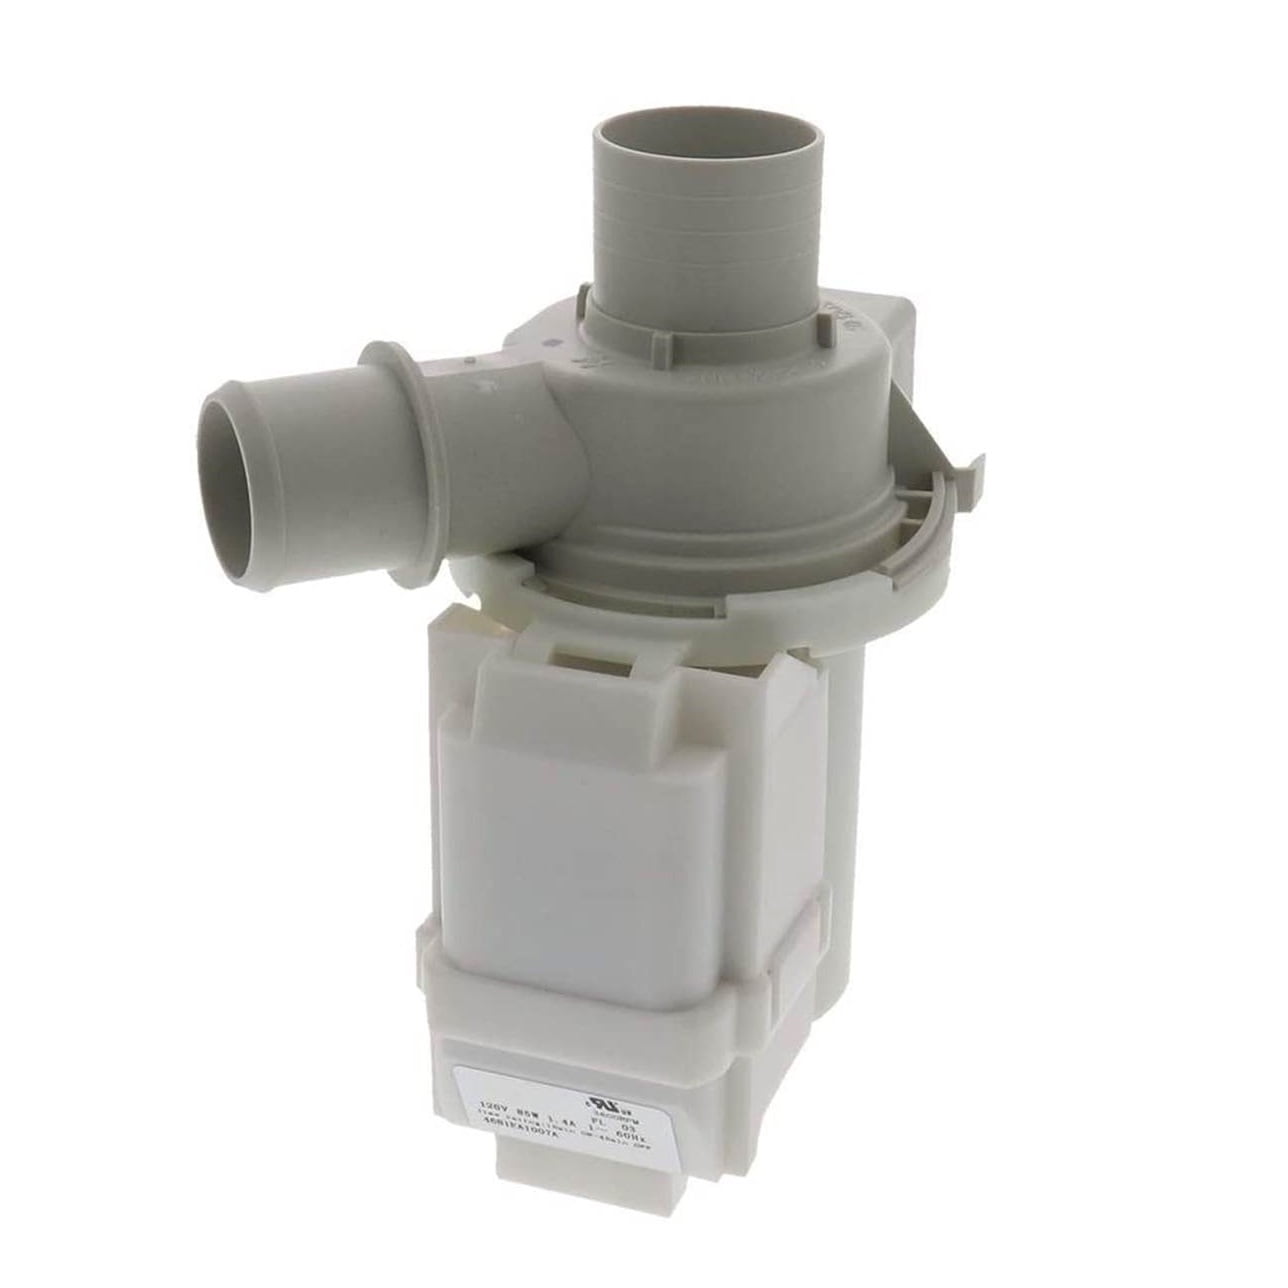 PS7785119 4681EA1007A Washer Drain Pump for LG Replaces AP5672914 